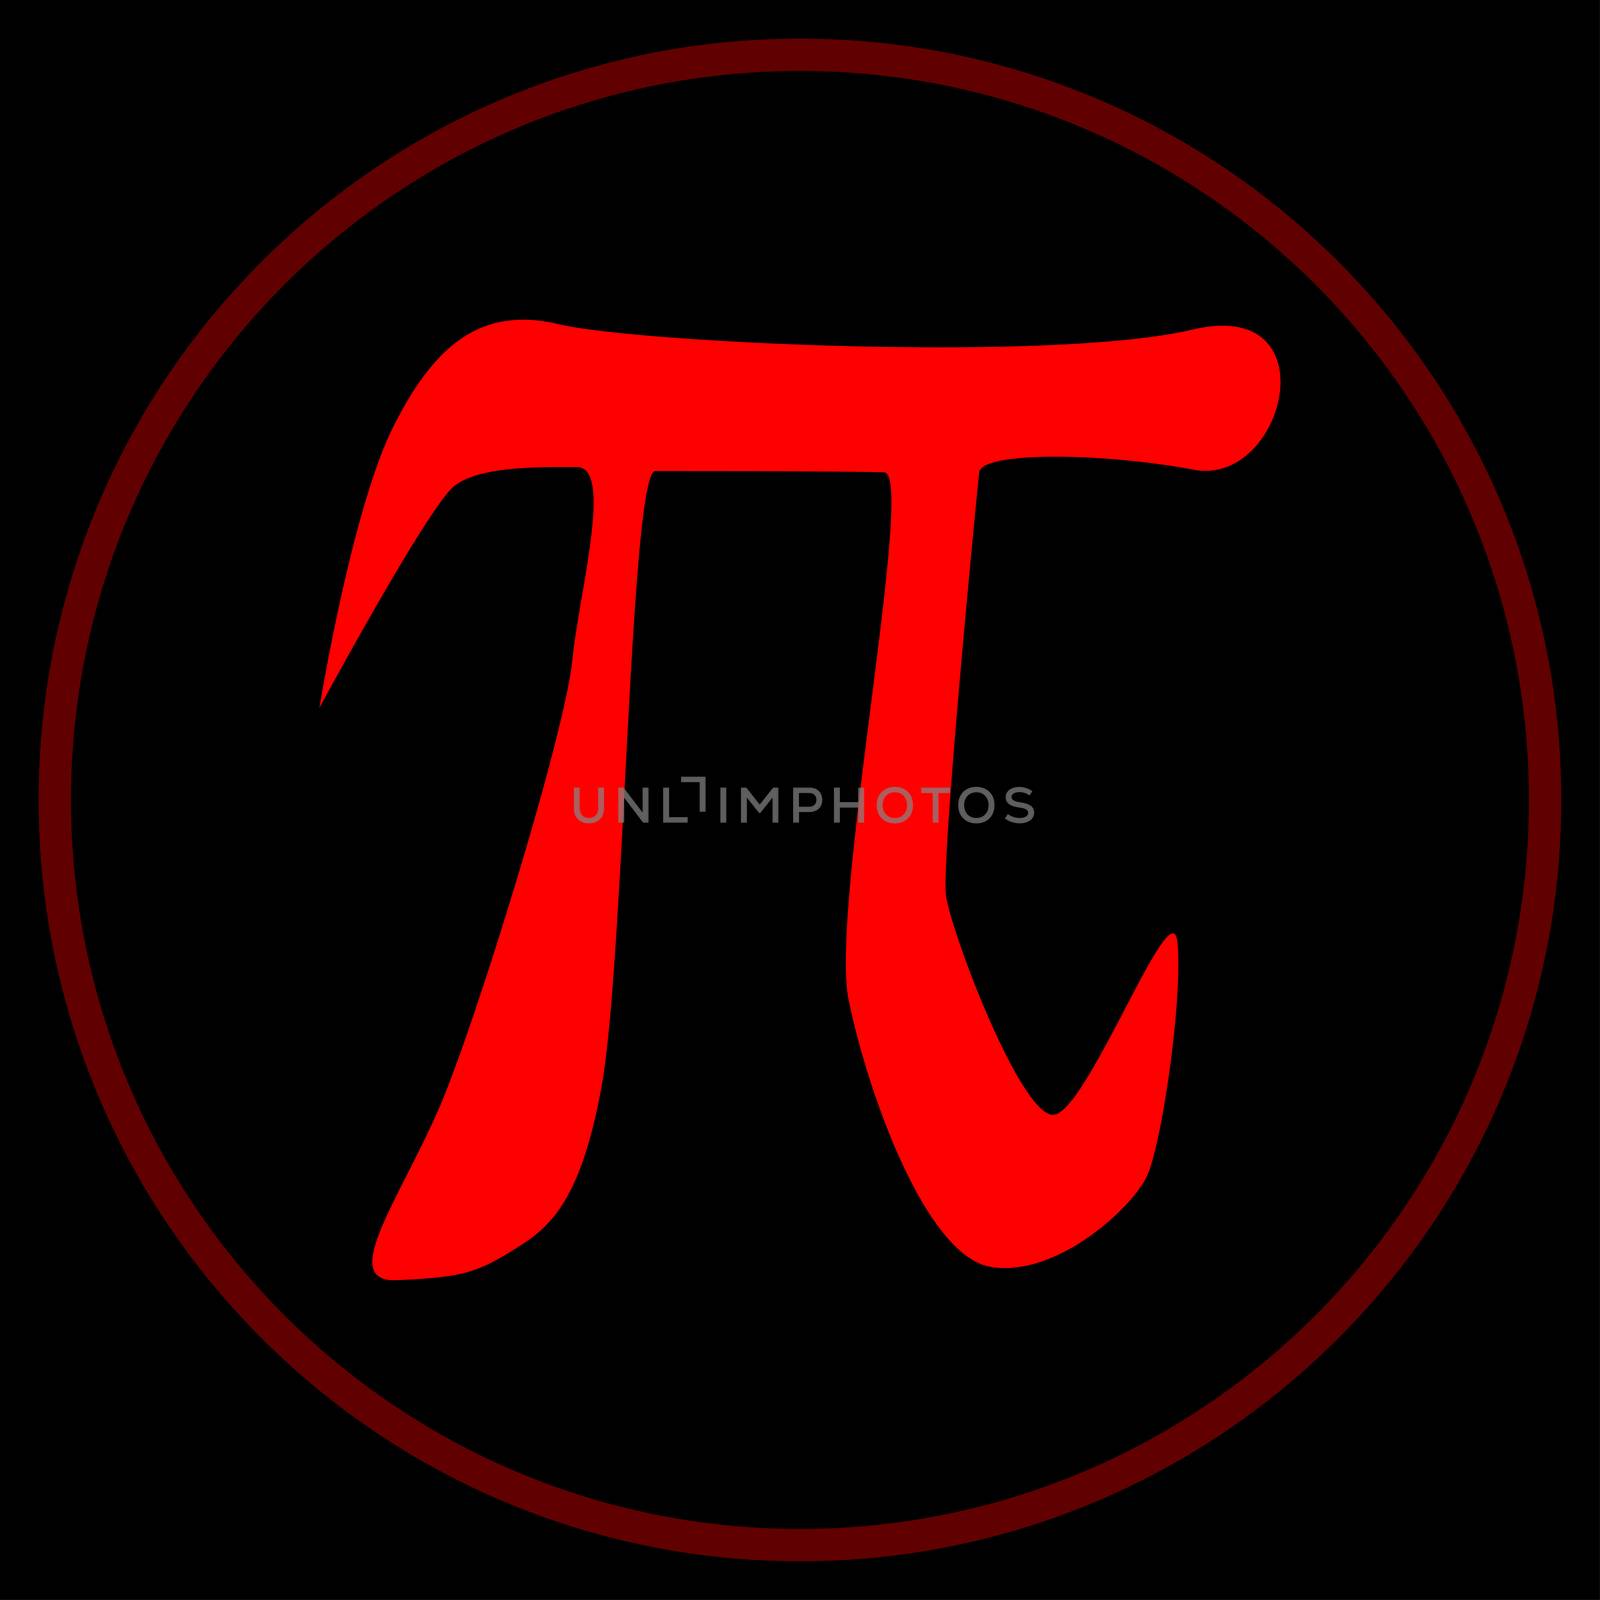 The constant Pi inside a red circle over a black background